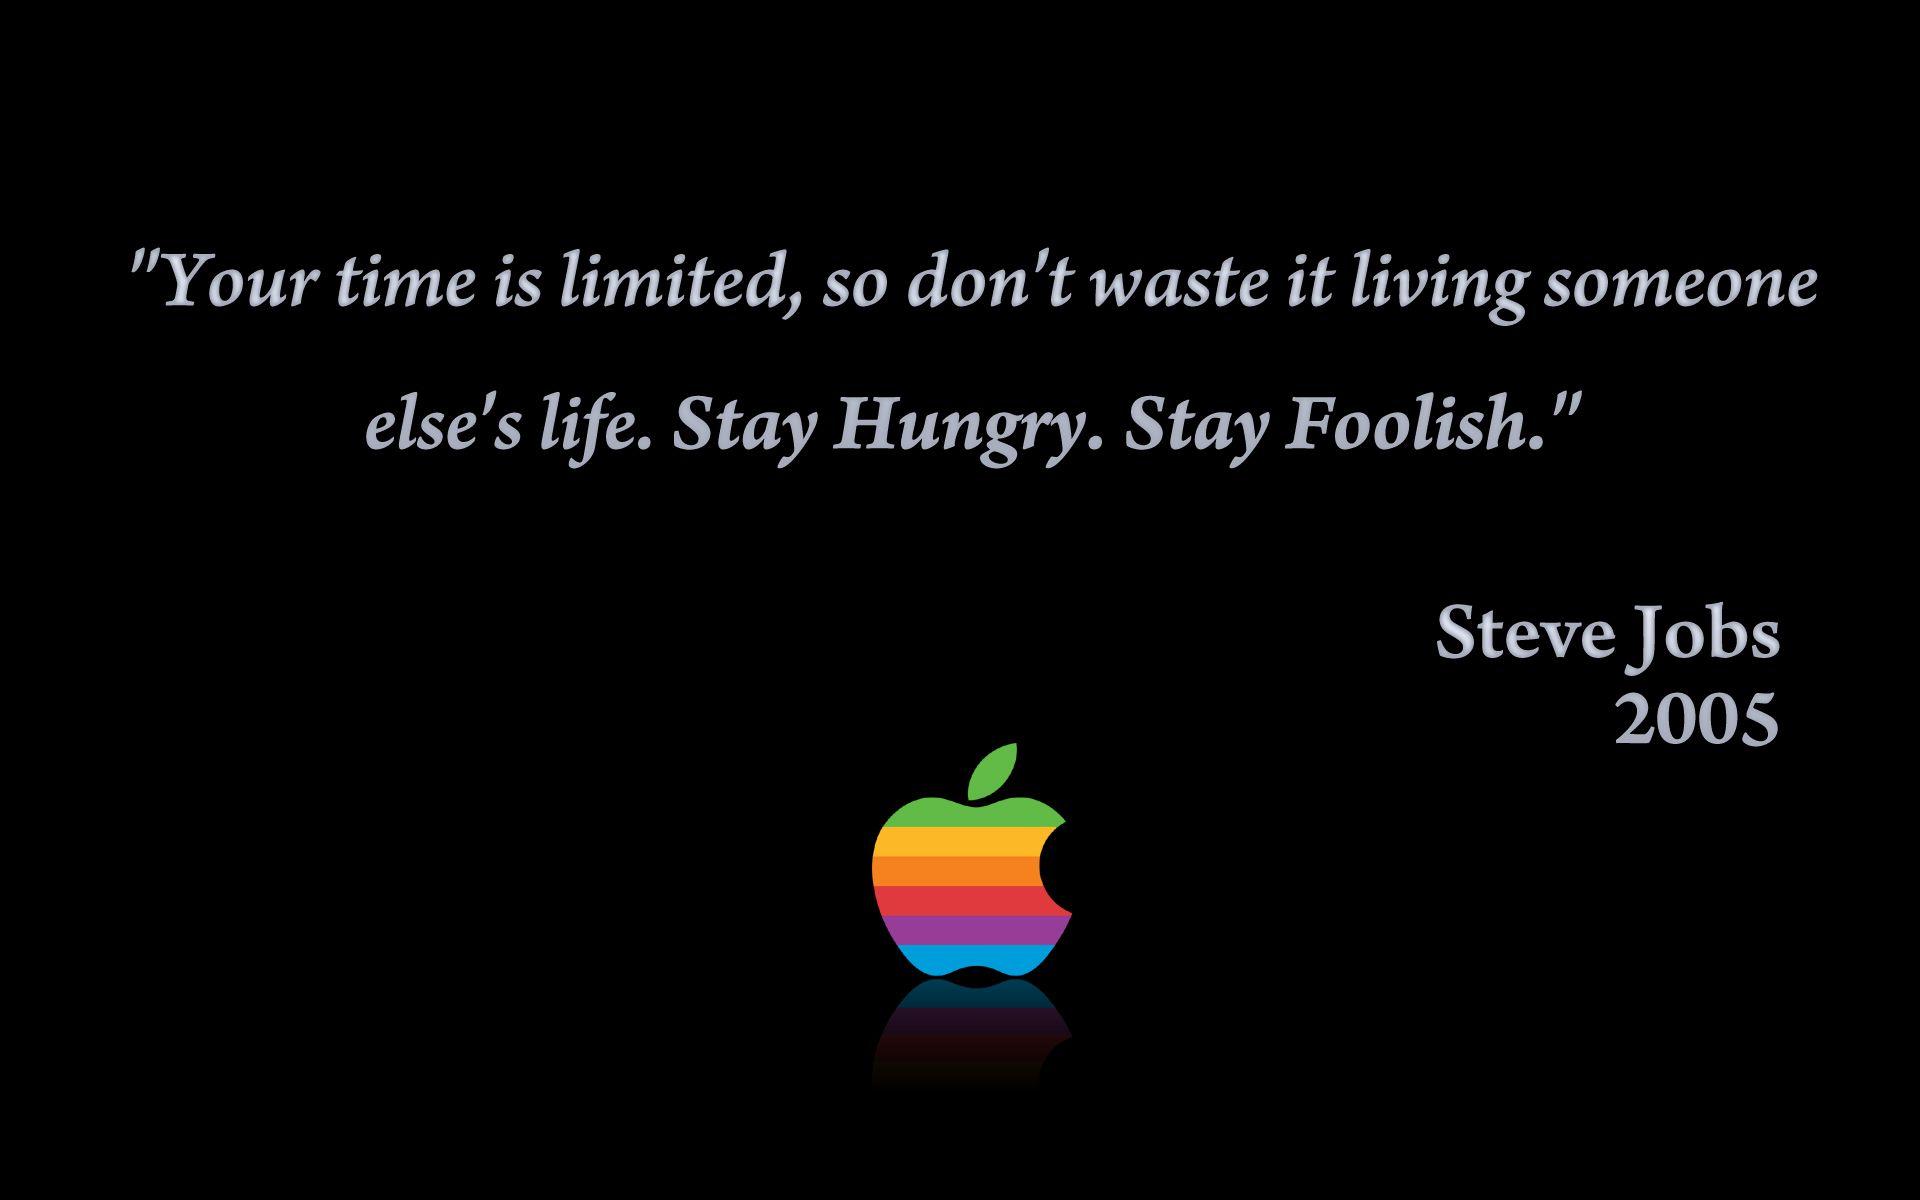 Stay Foolish, Stay Hungry” Wallpaper For IOS And PC Mac